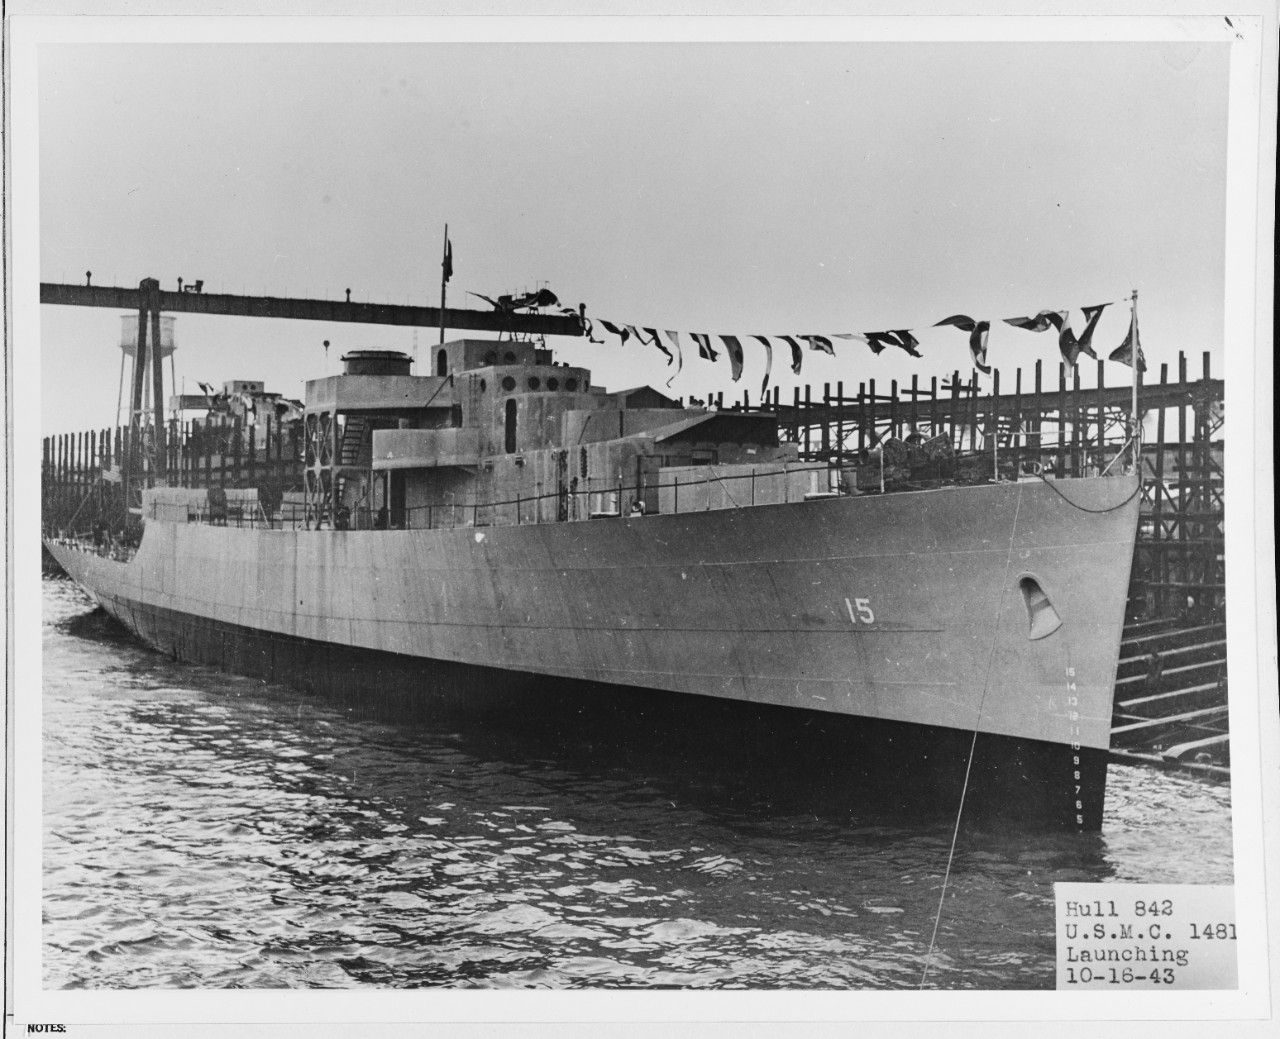 USS ANNAPOLIS (PF-15) at launching 16 October 1943.